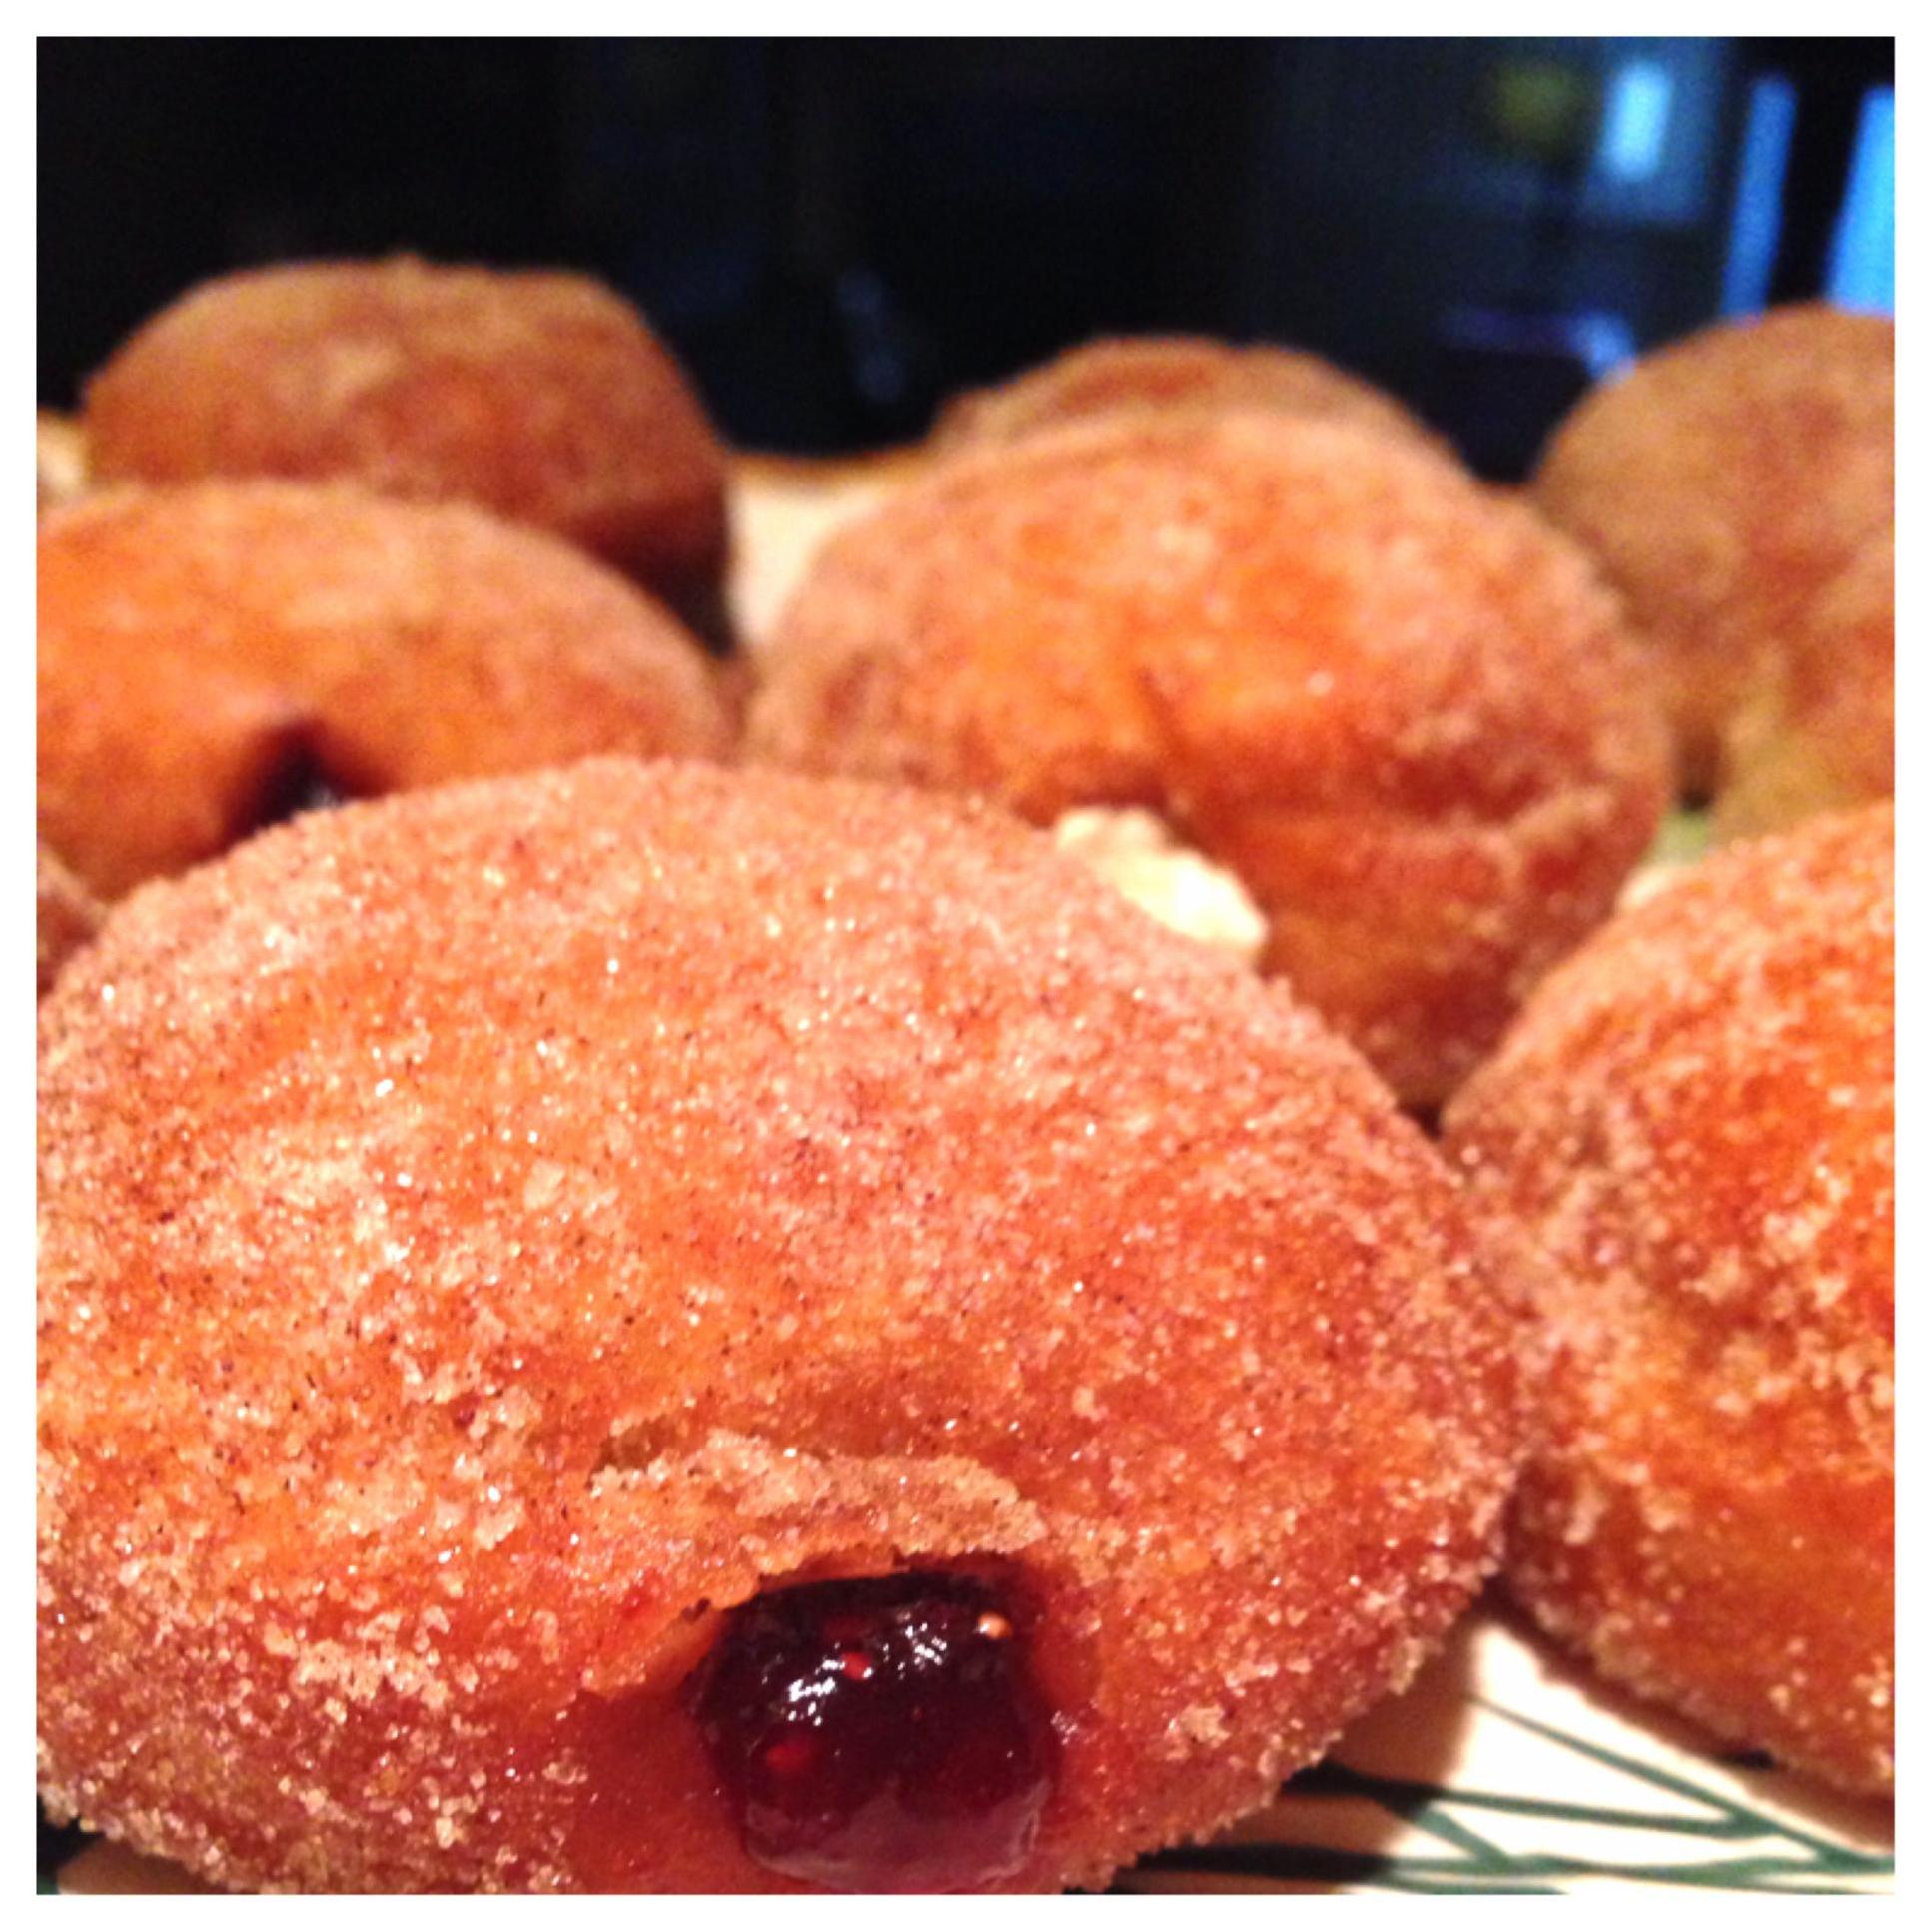  Get ready to impress your family and friends with these show-stopping, homemade sufganiyot.